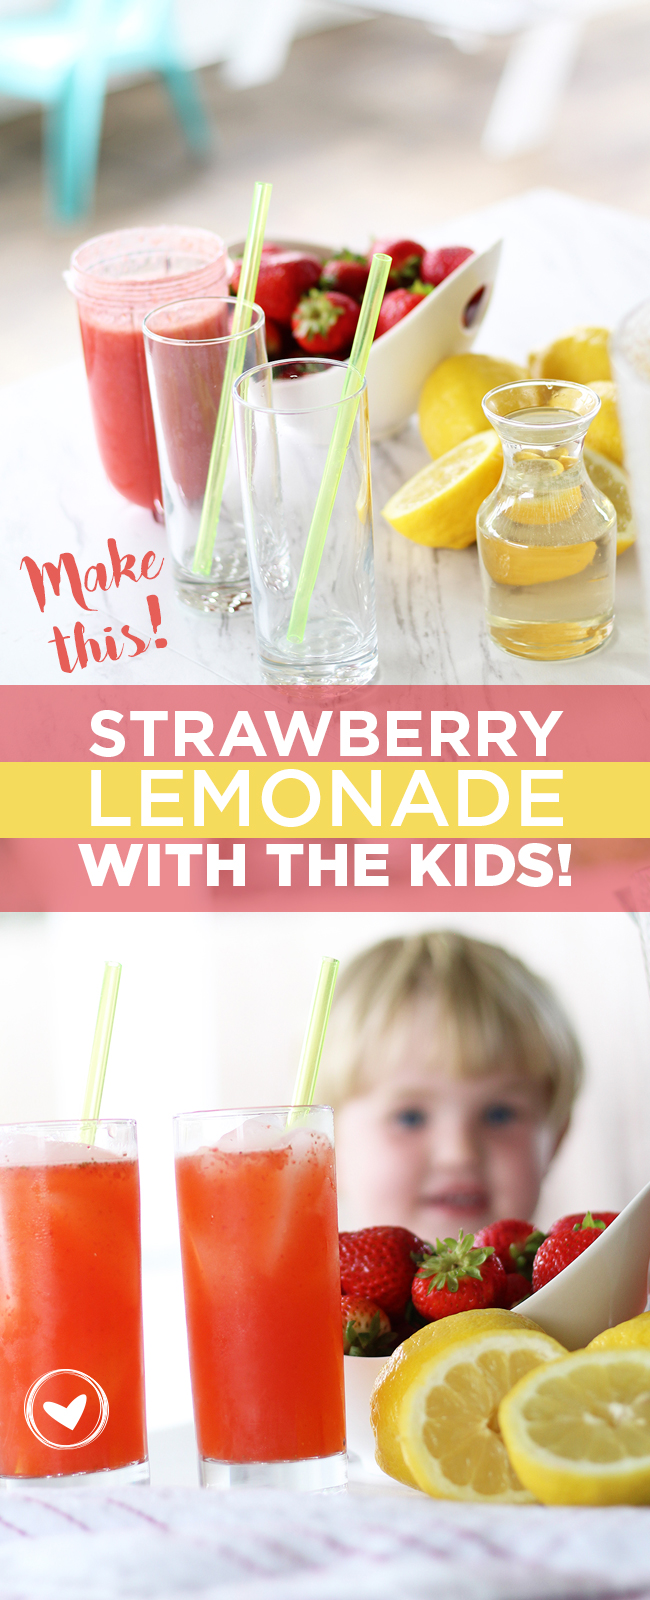 Make this! strawberry lemonade with the kids